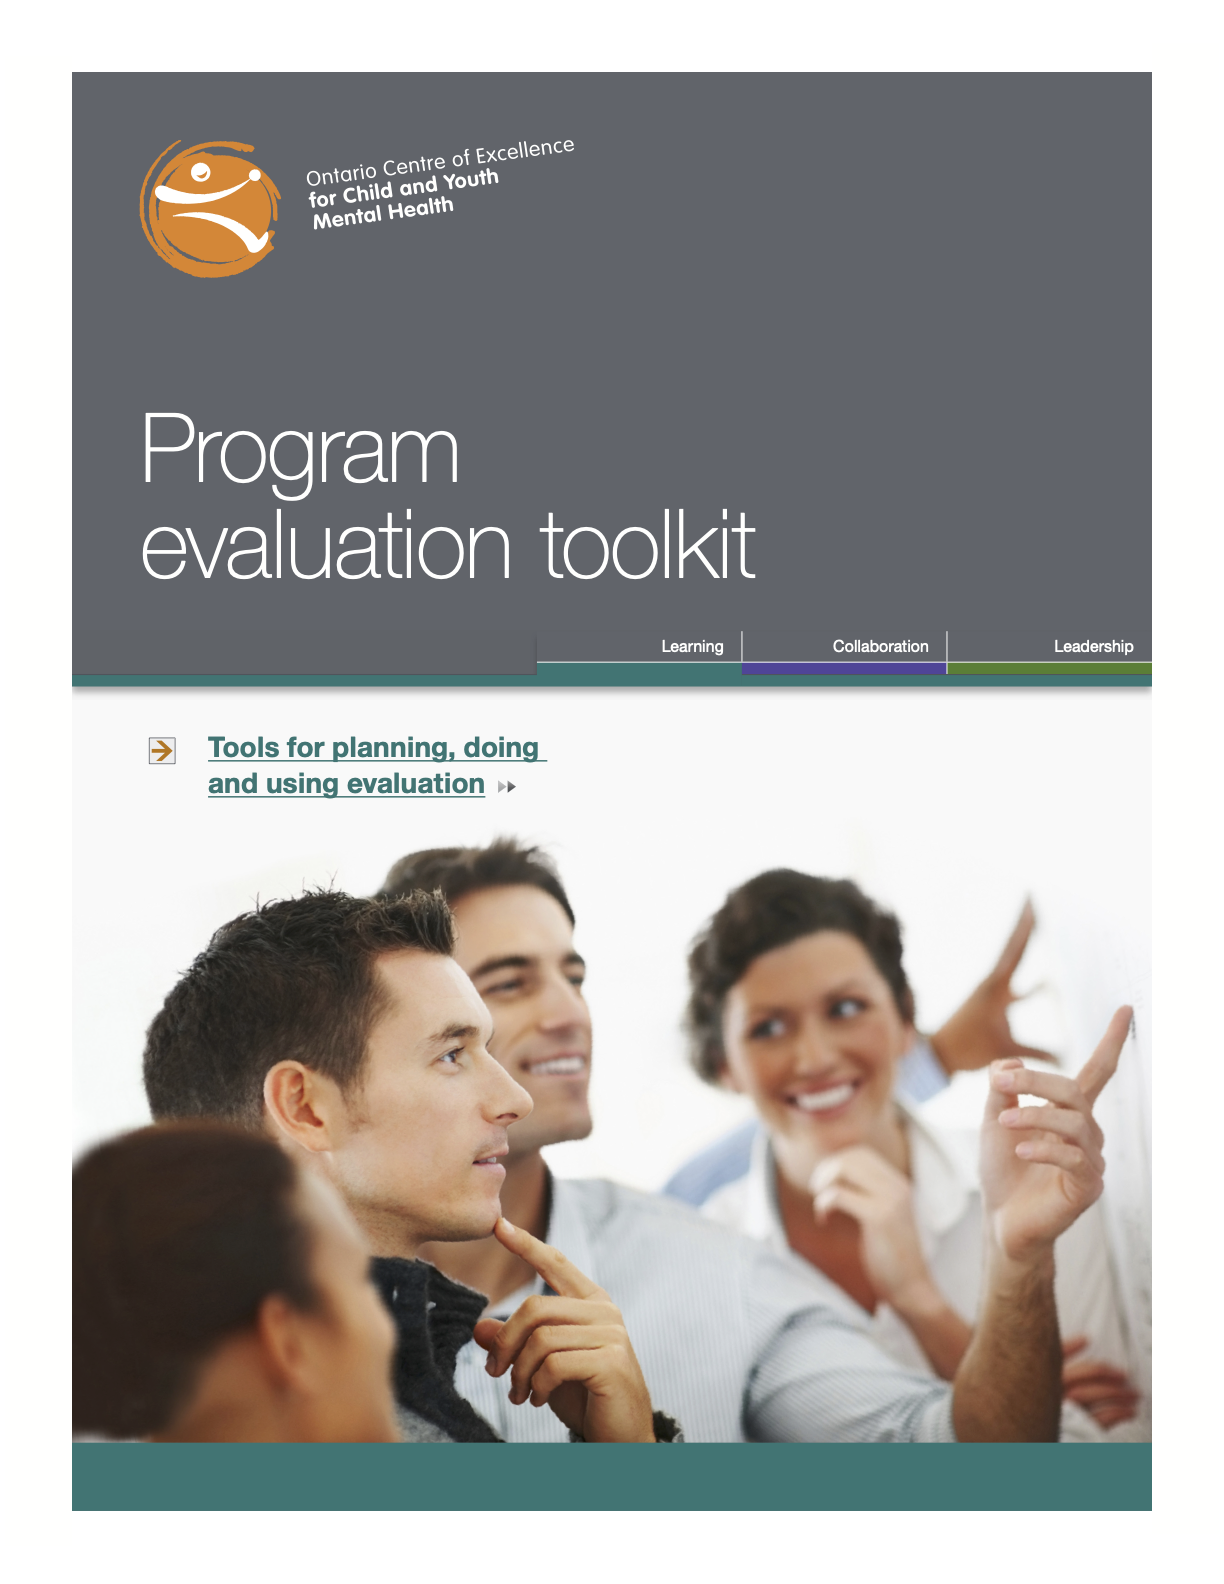 Program Evaluation Toolkit: Tools for Planning, Doing and Using Evaluation